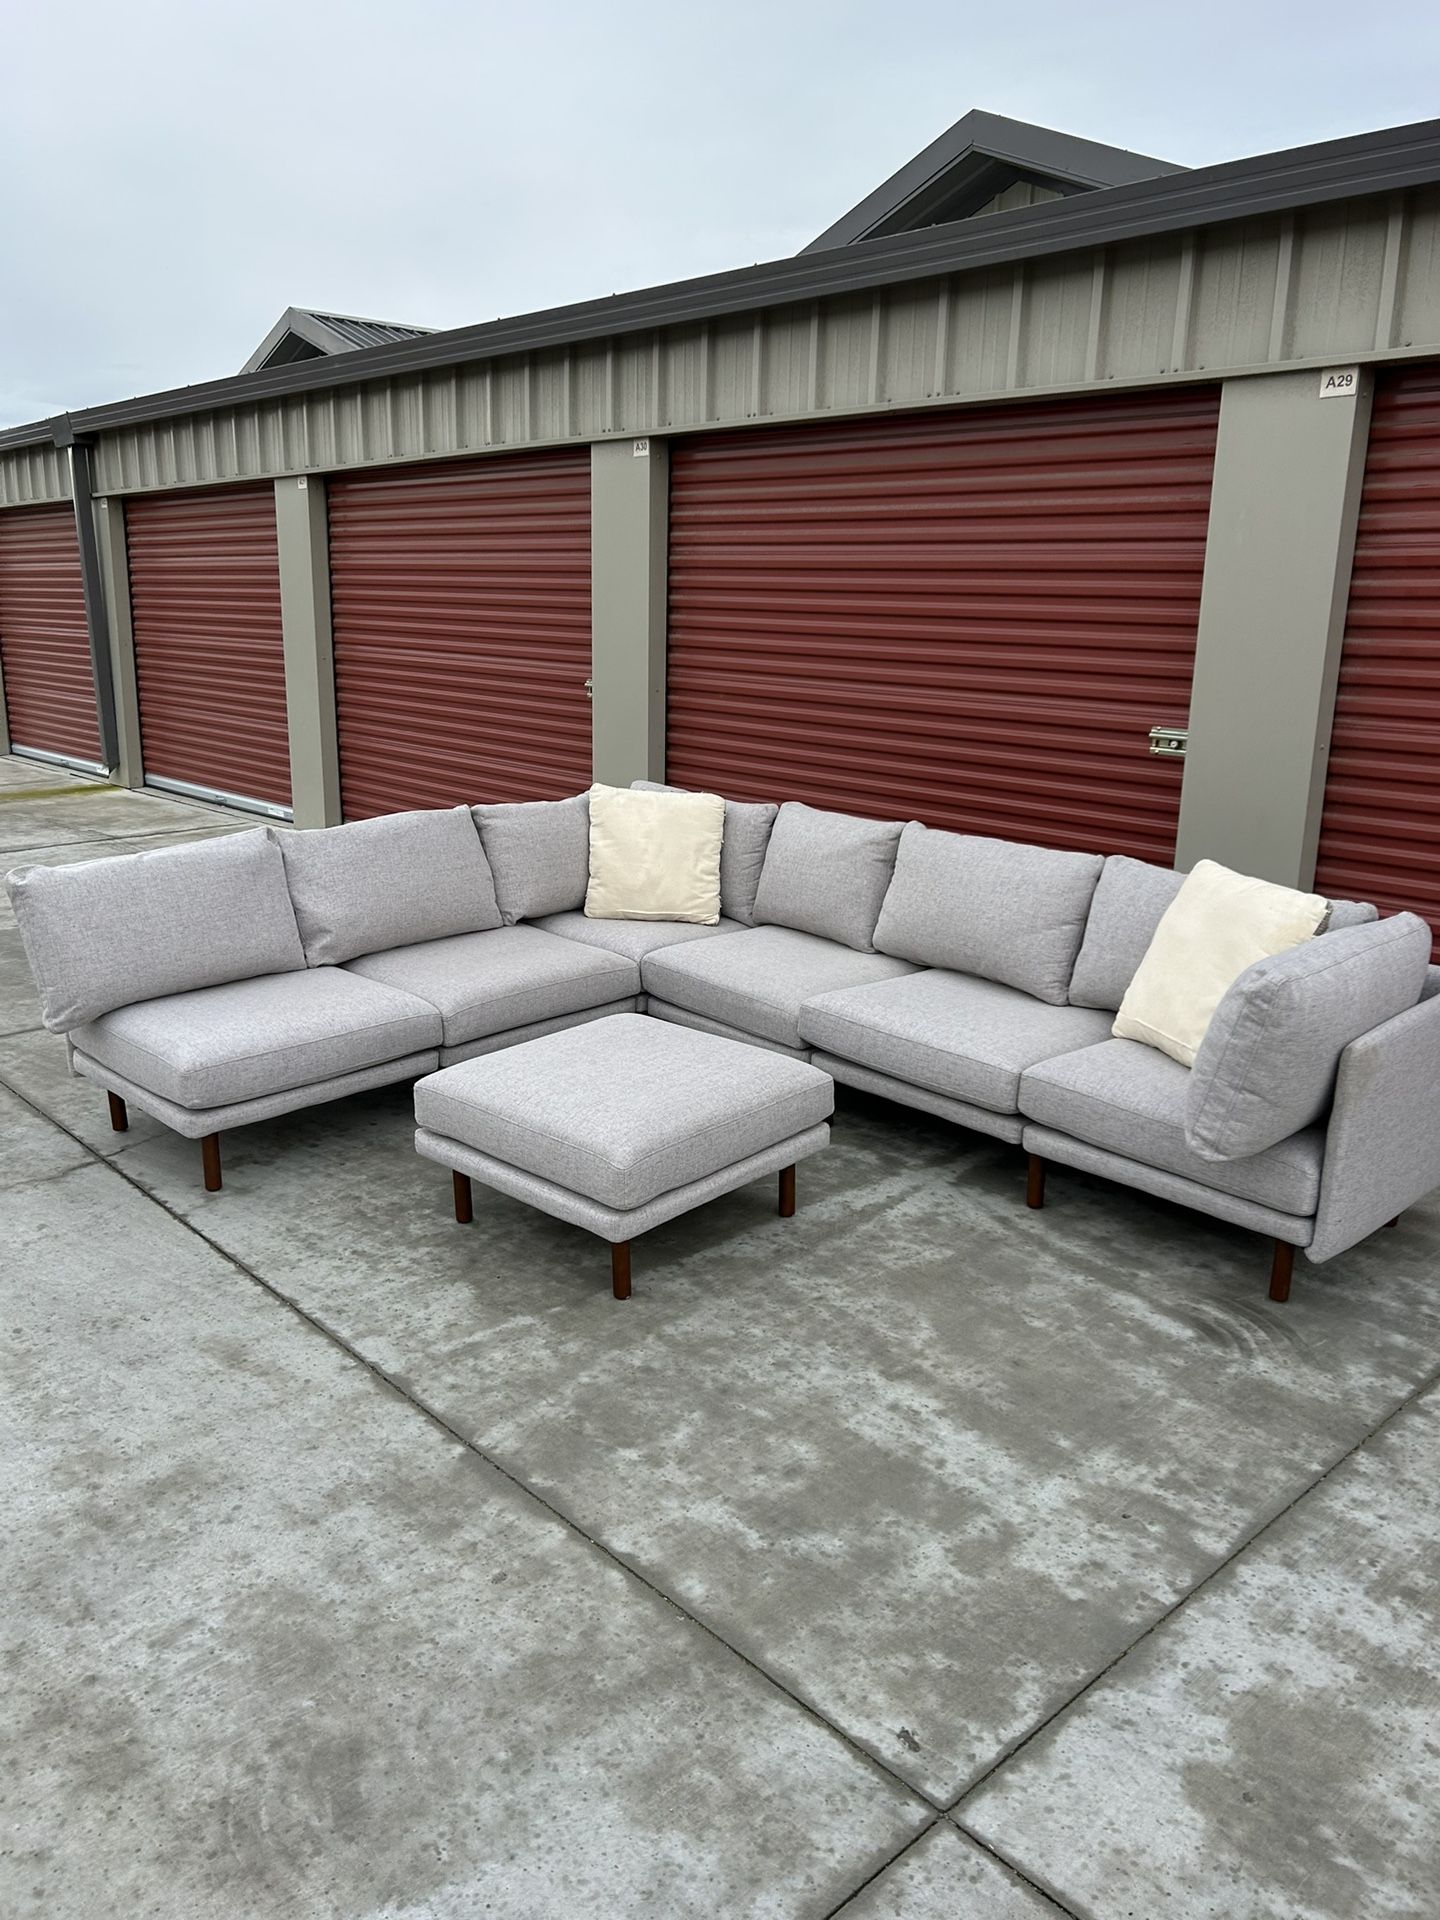 FREE DELIVERY&INSTALLATION Modular Couch+Ottoman